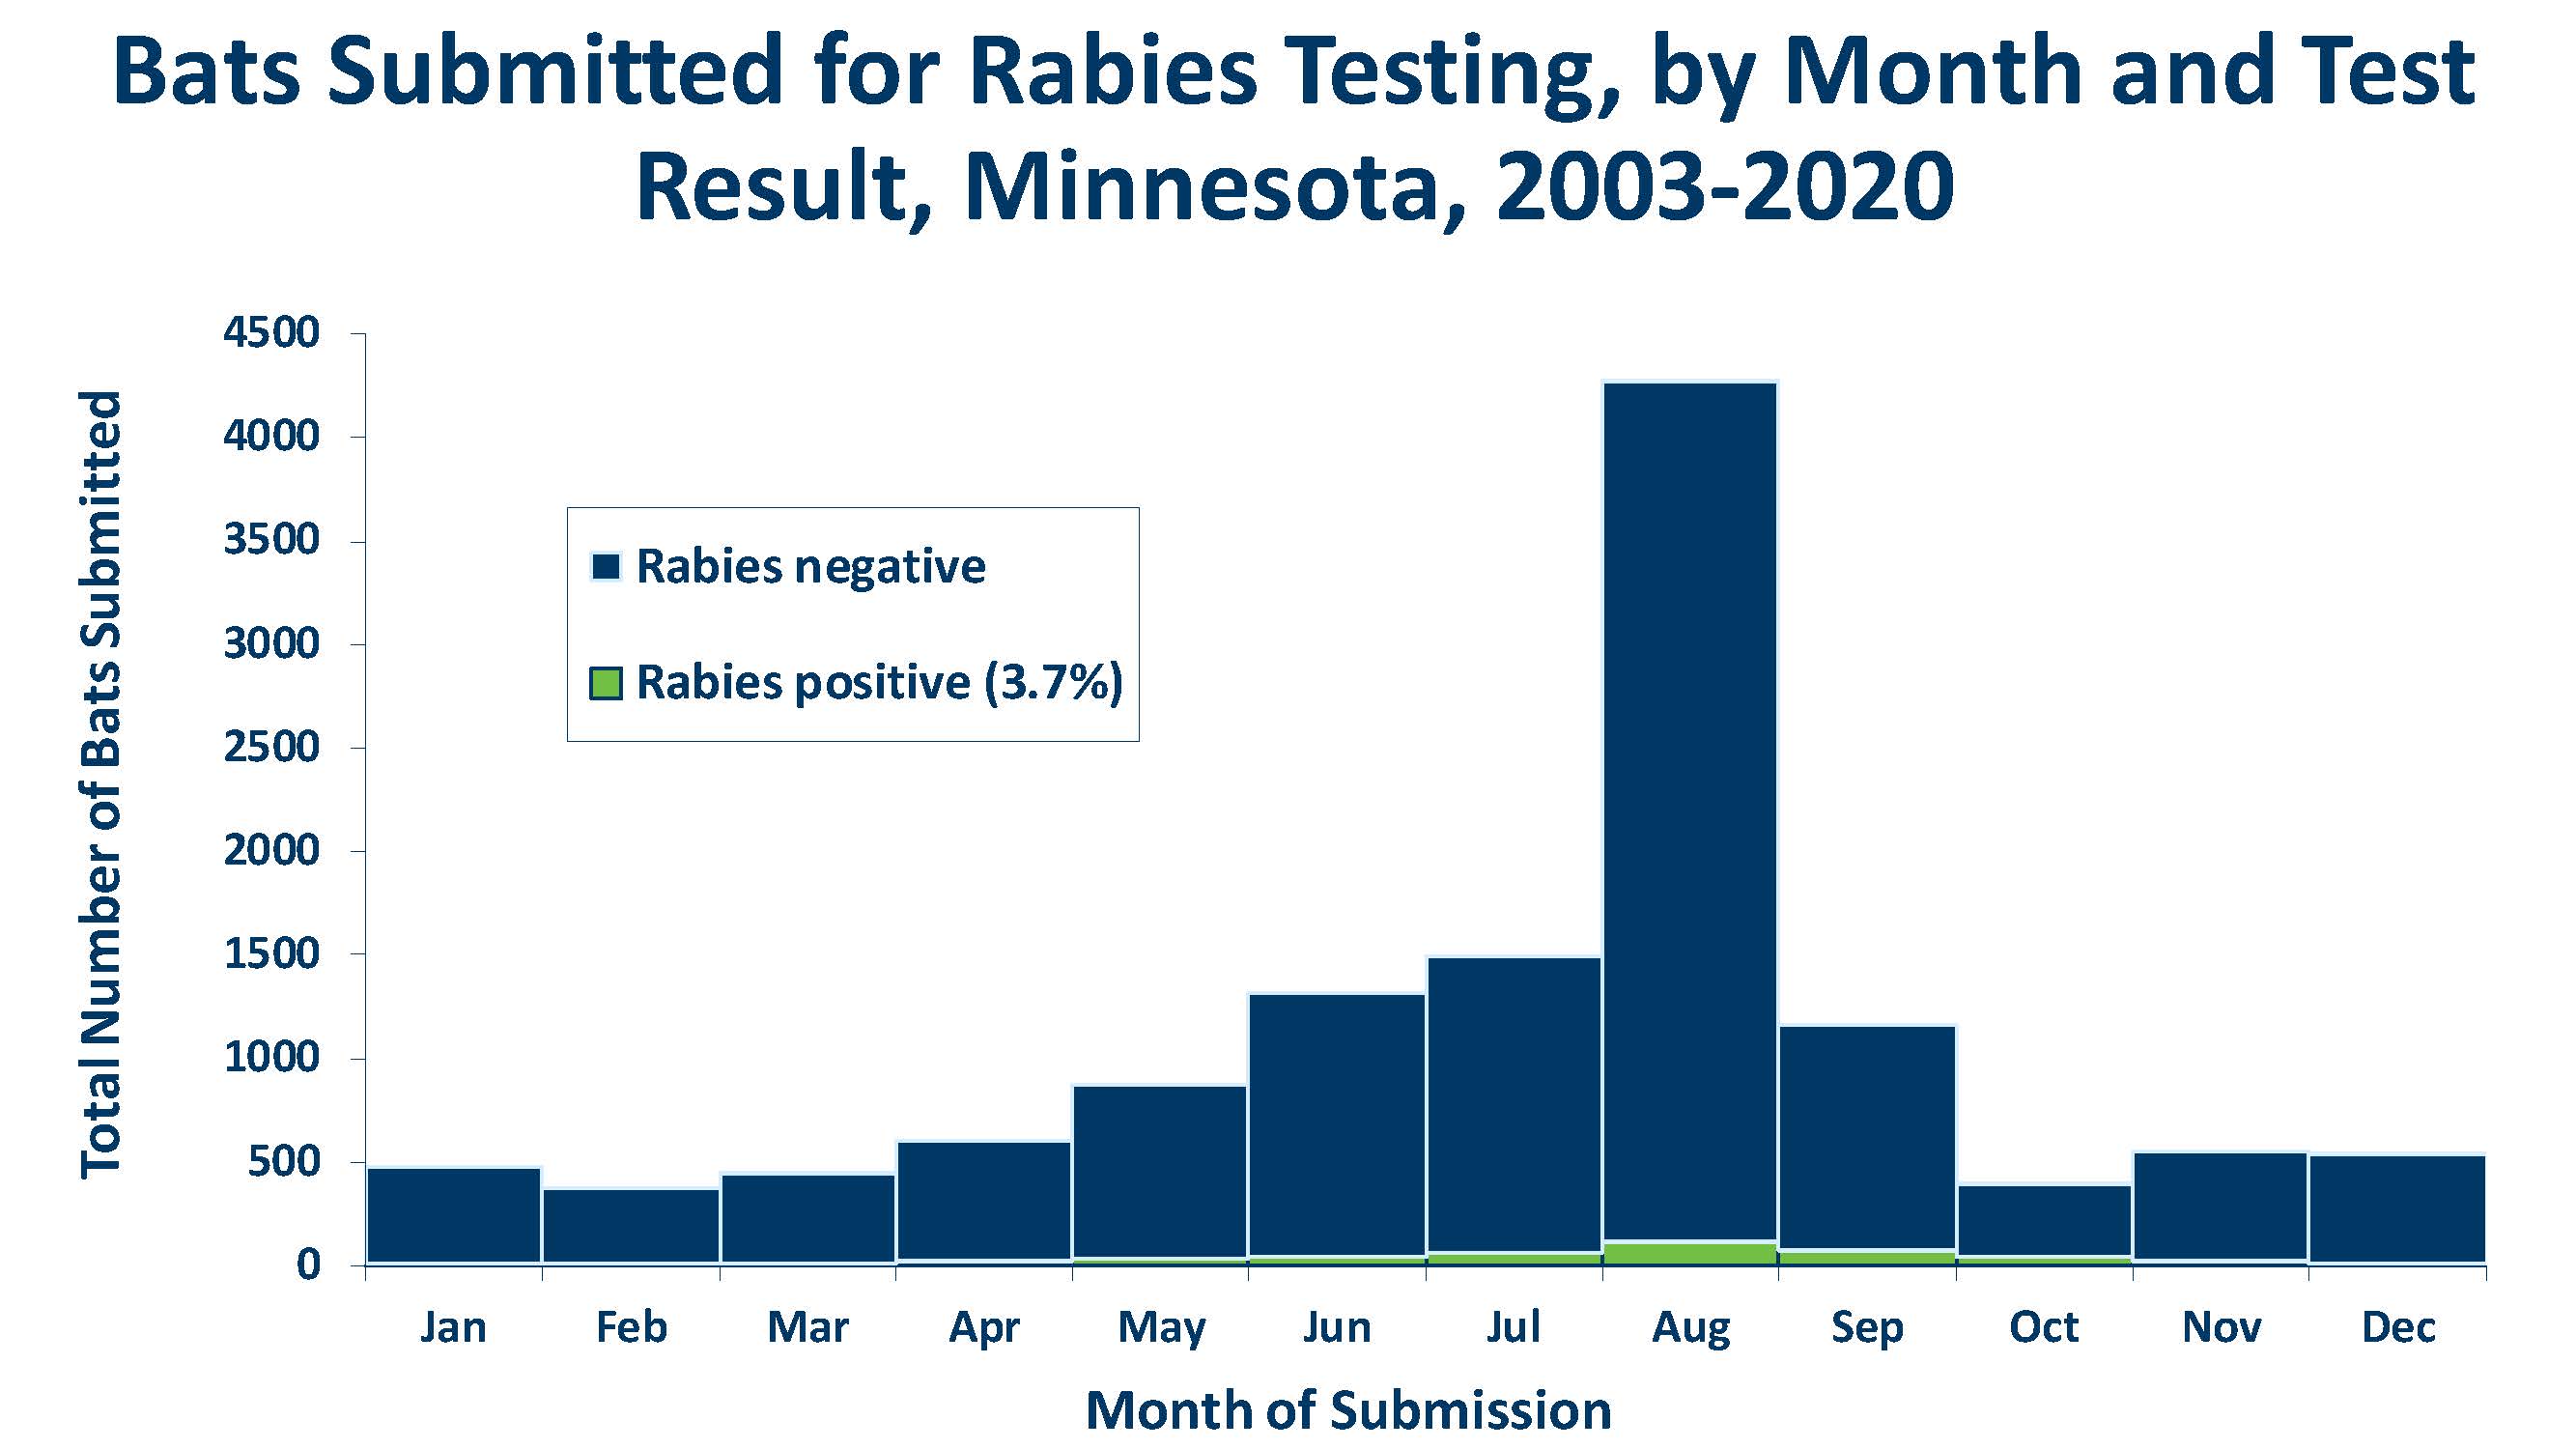 graph of bats submitted for rabies testing